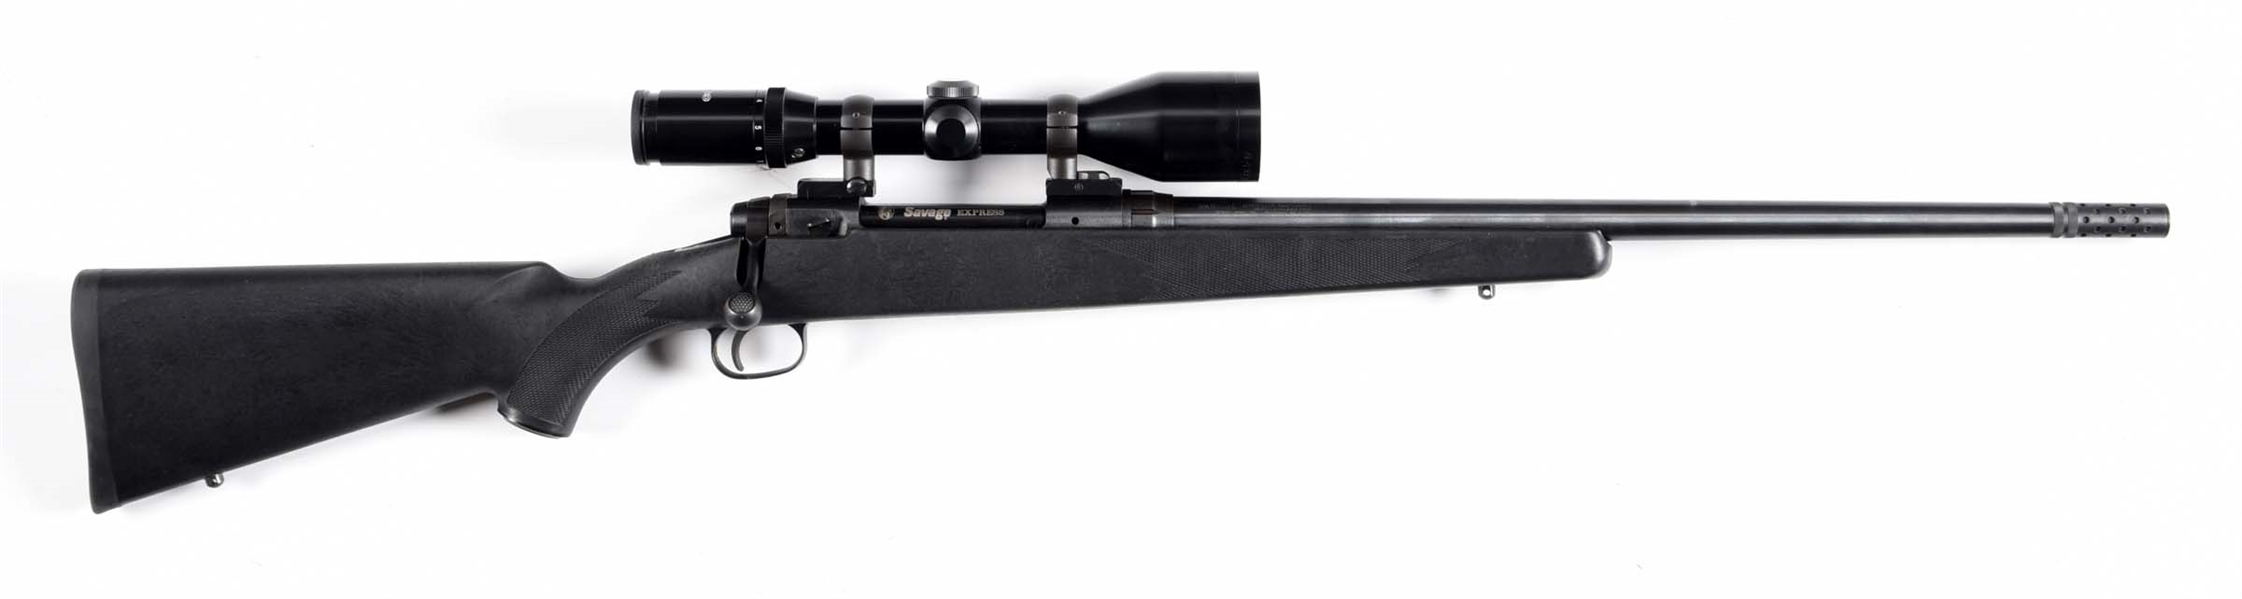 (M) SAVAGE MODEL 111 .300 WIN MAG BOLT ACTION RIFLE.